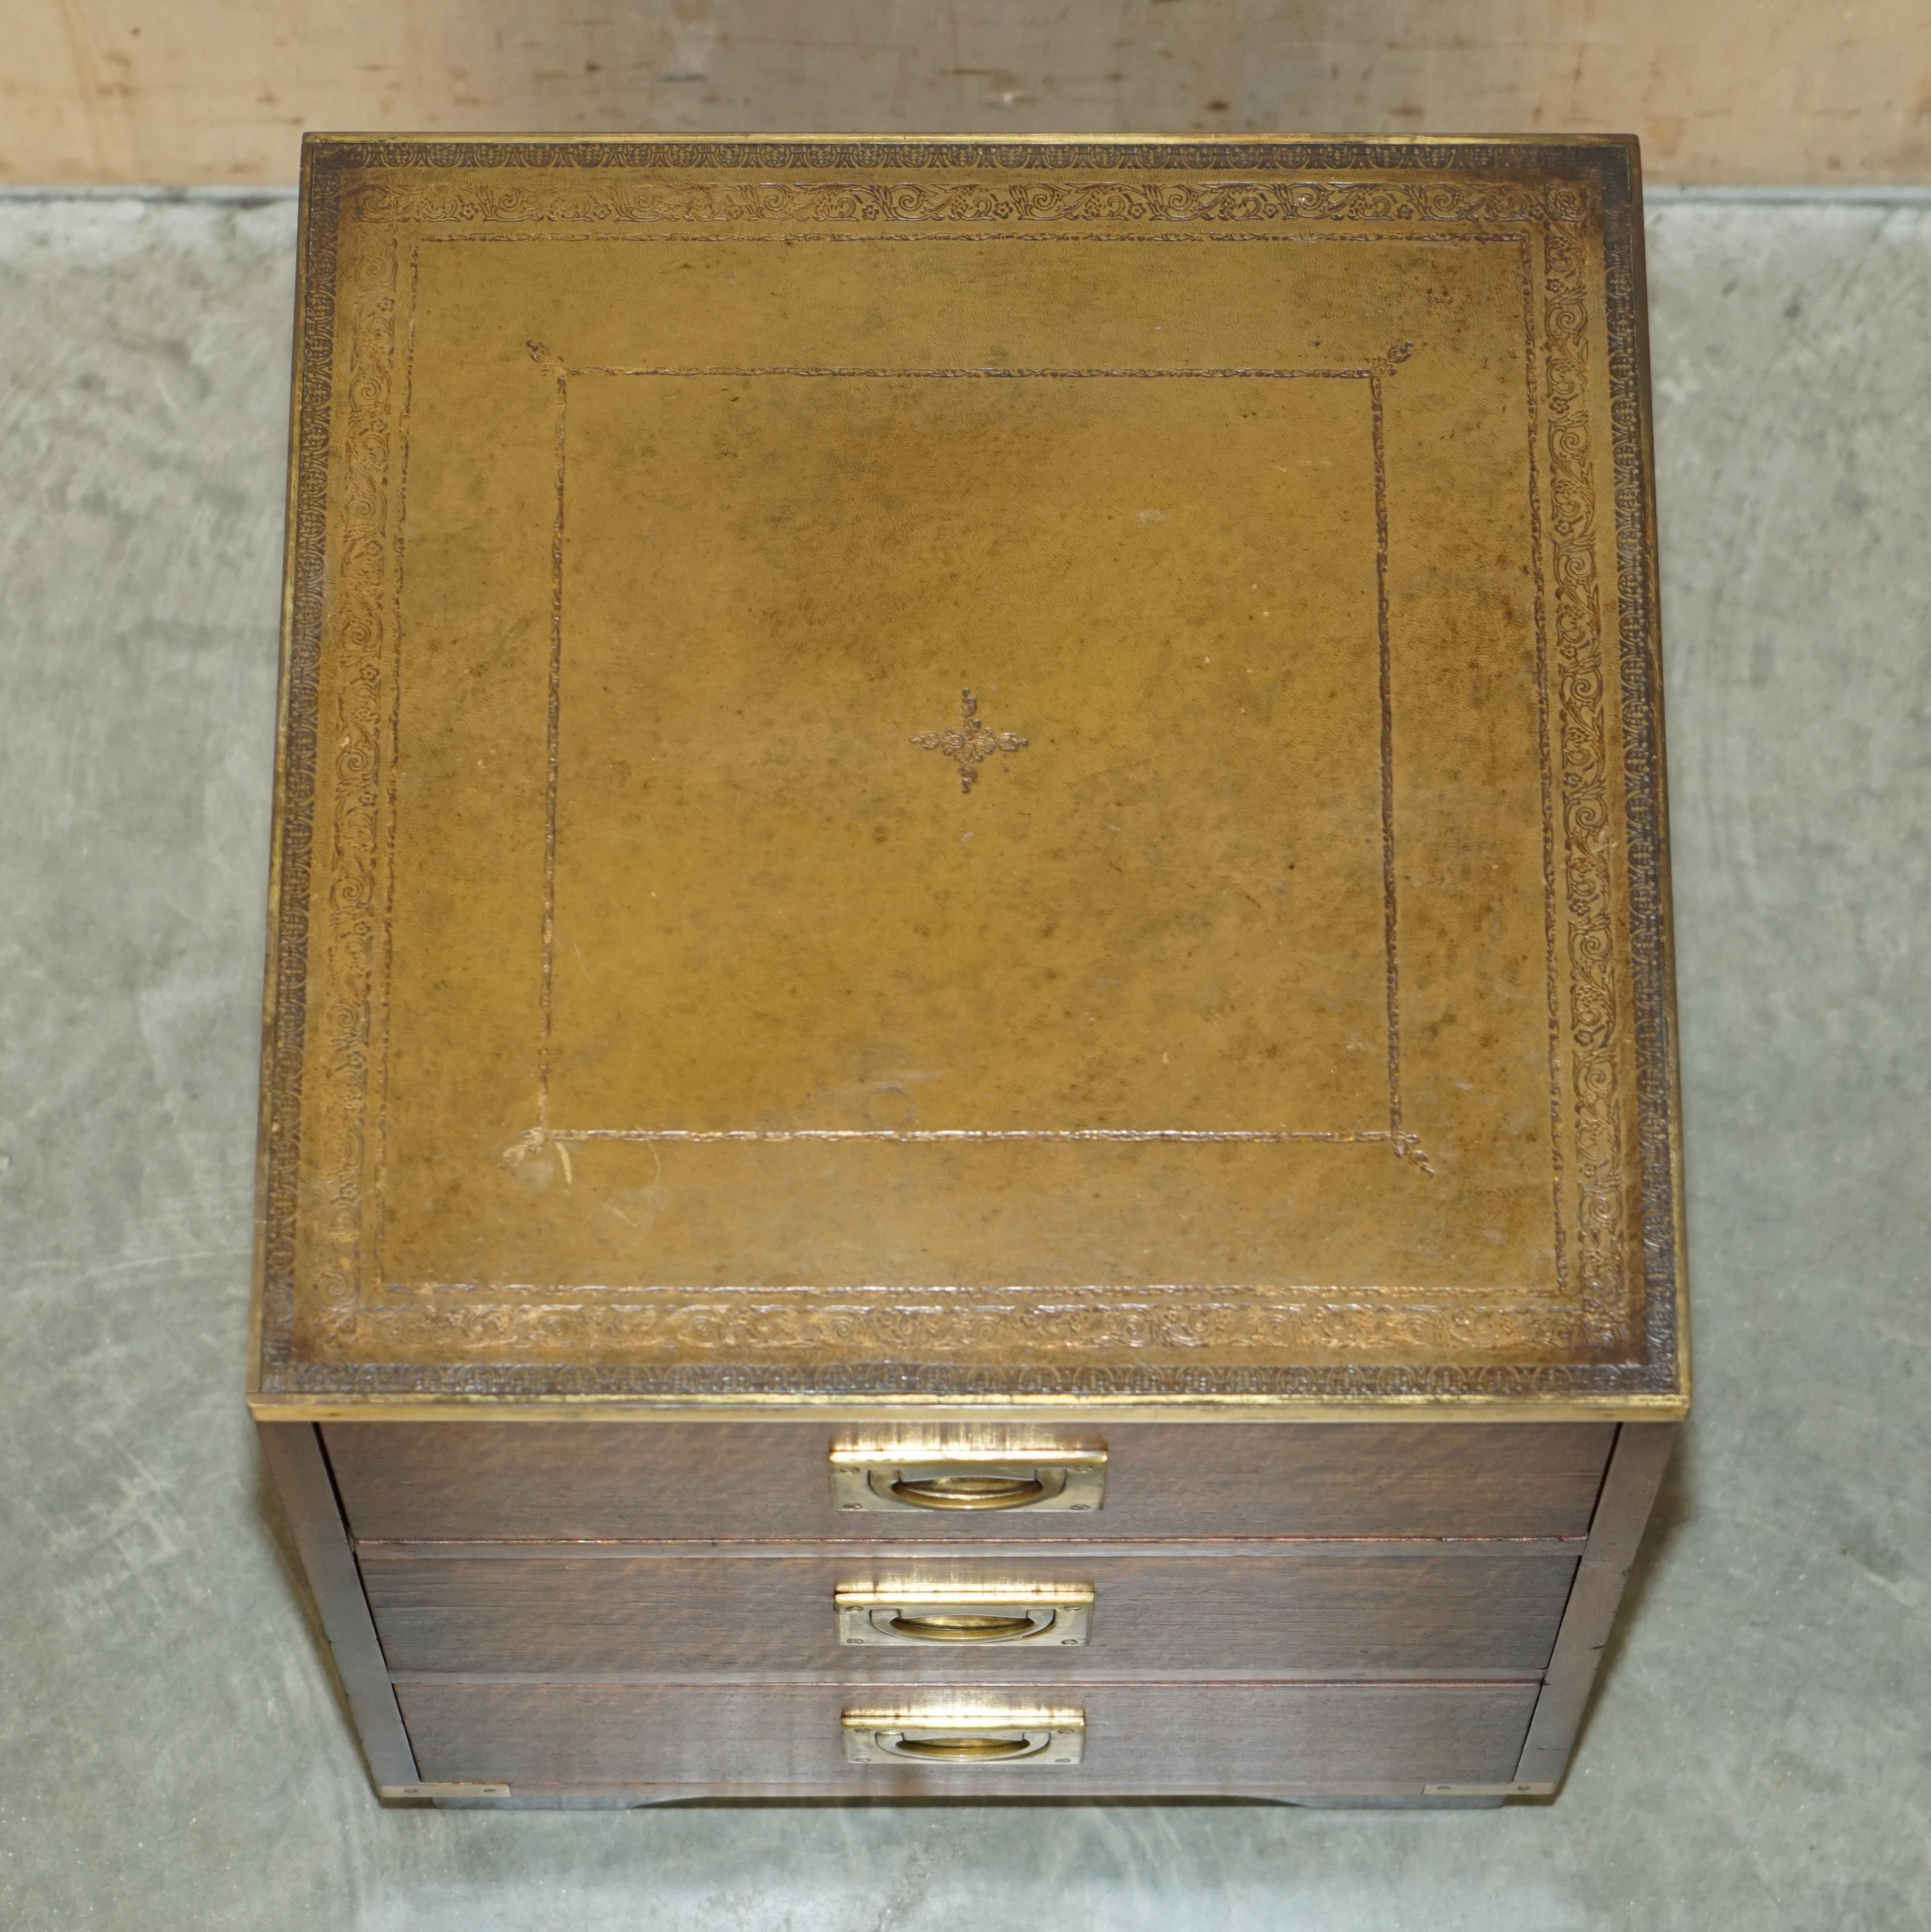 HARRODS KENNEDY Campagne MILITAIRE STUNNING TABLE DRAWERS GREEN LEATHER en vente 3